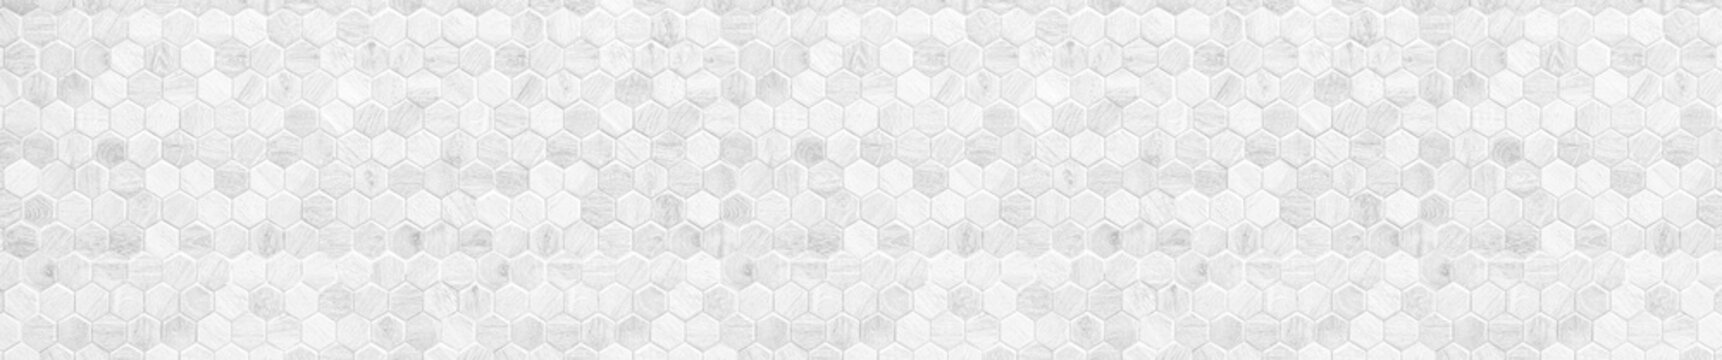 Honeycomb patterned wood panels in hexagonal shape, wood, blackground, abstract brown pattern